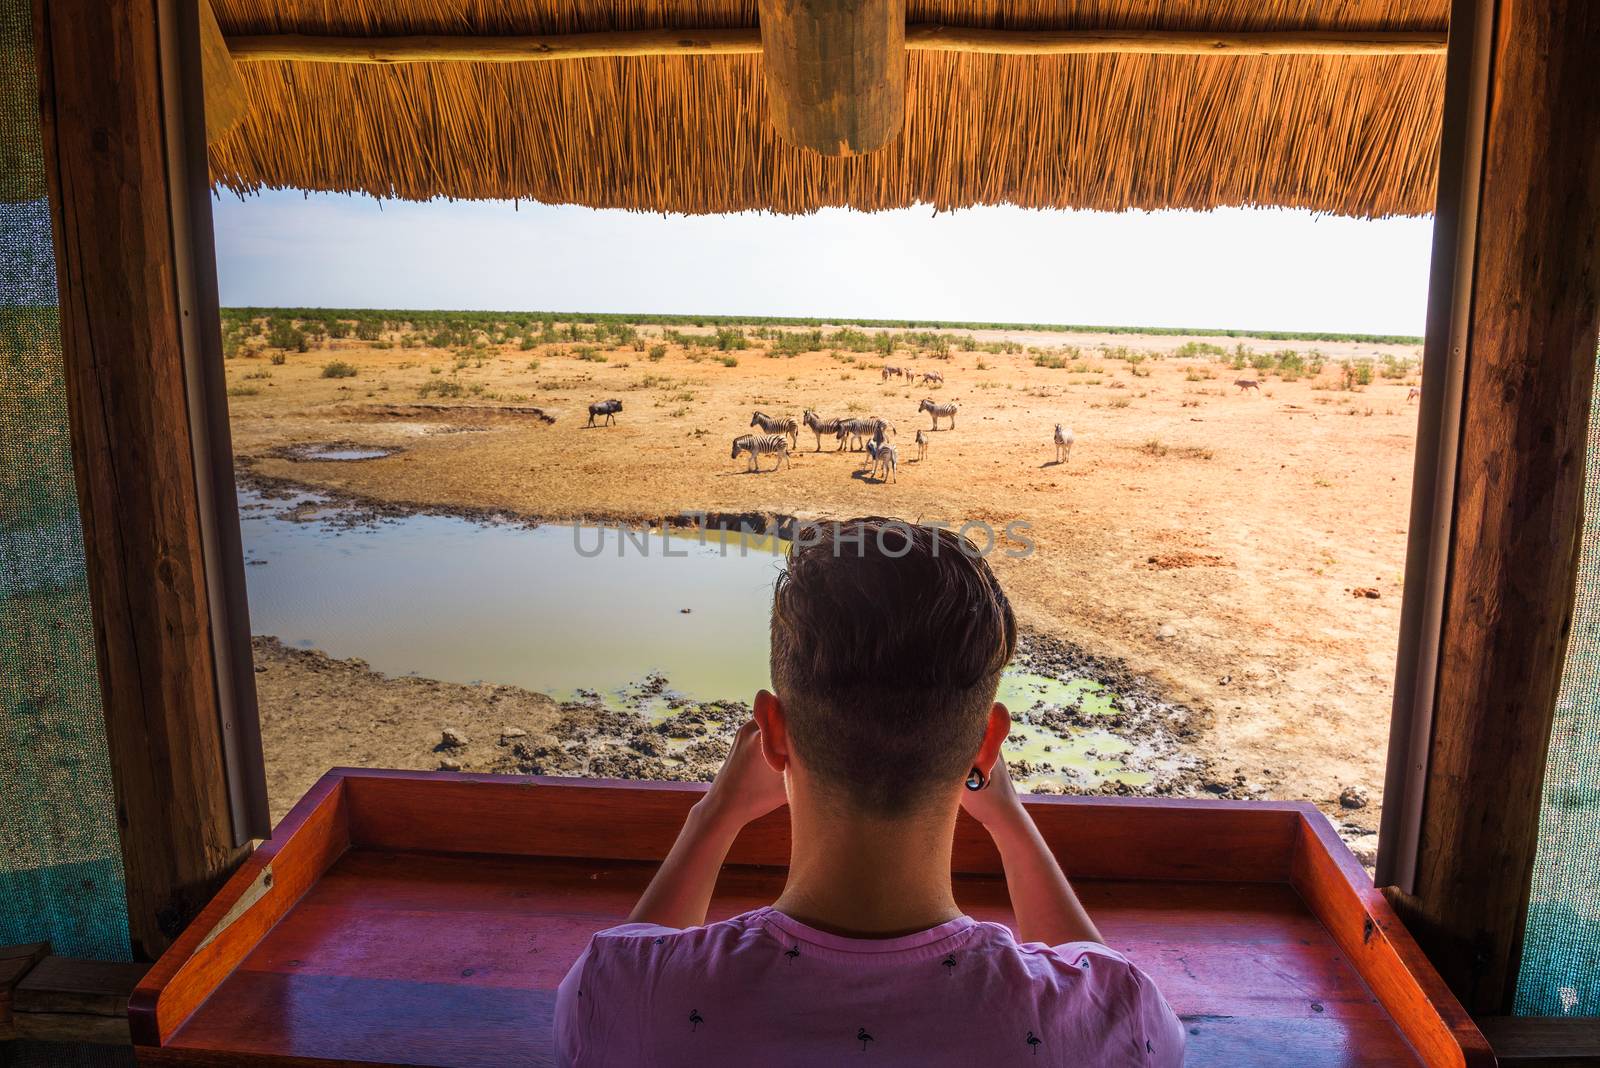 Tourist watches and films wildlife with a smartphone from a hide at the Olifantsrus waterhole in Etosha National Park, Namibia